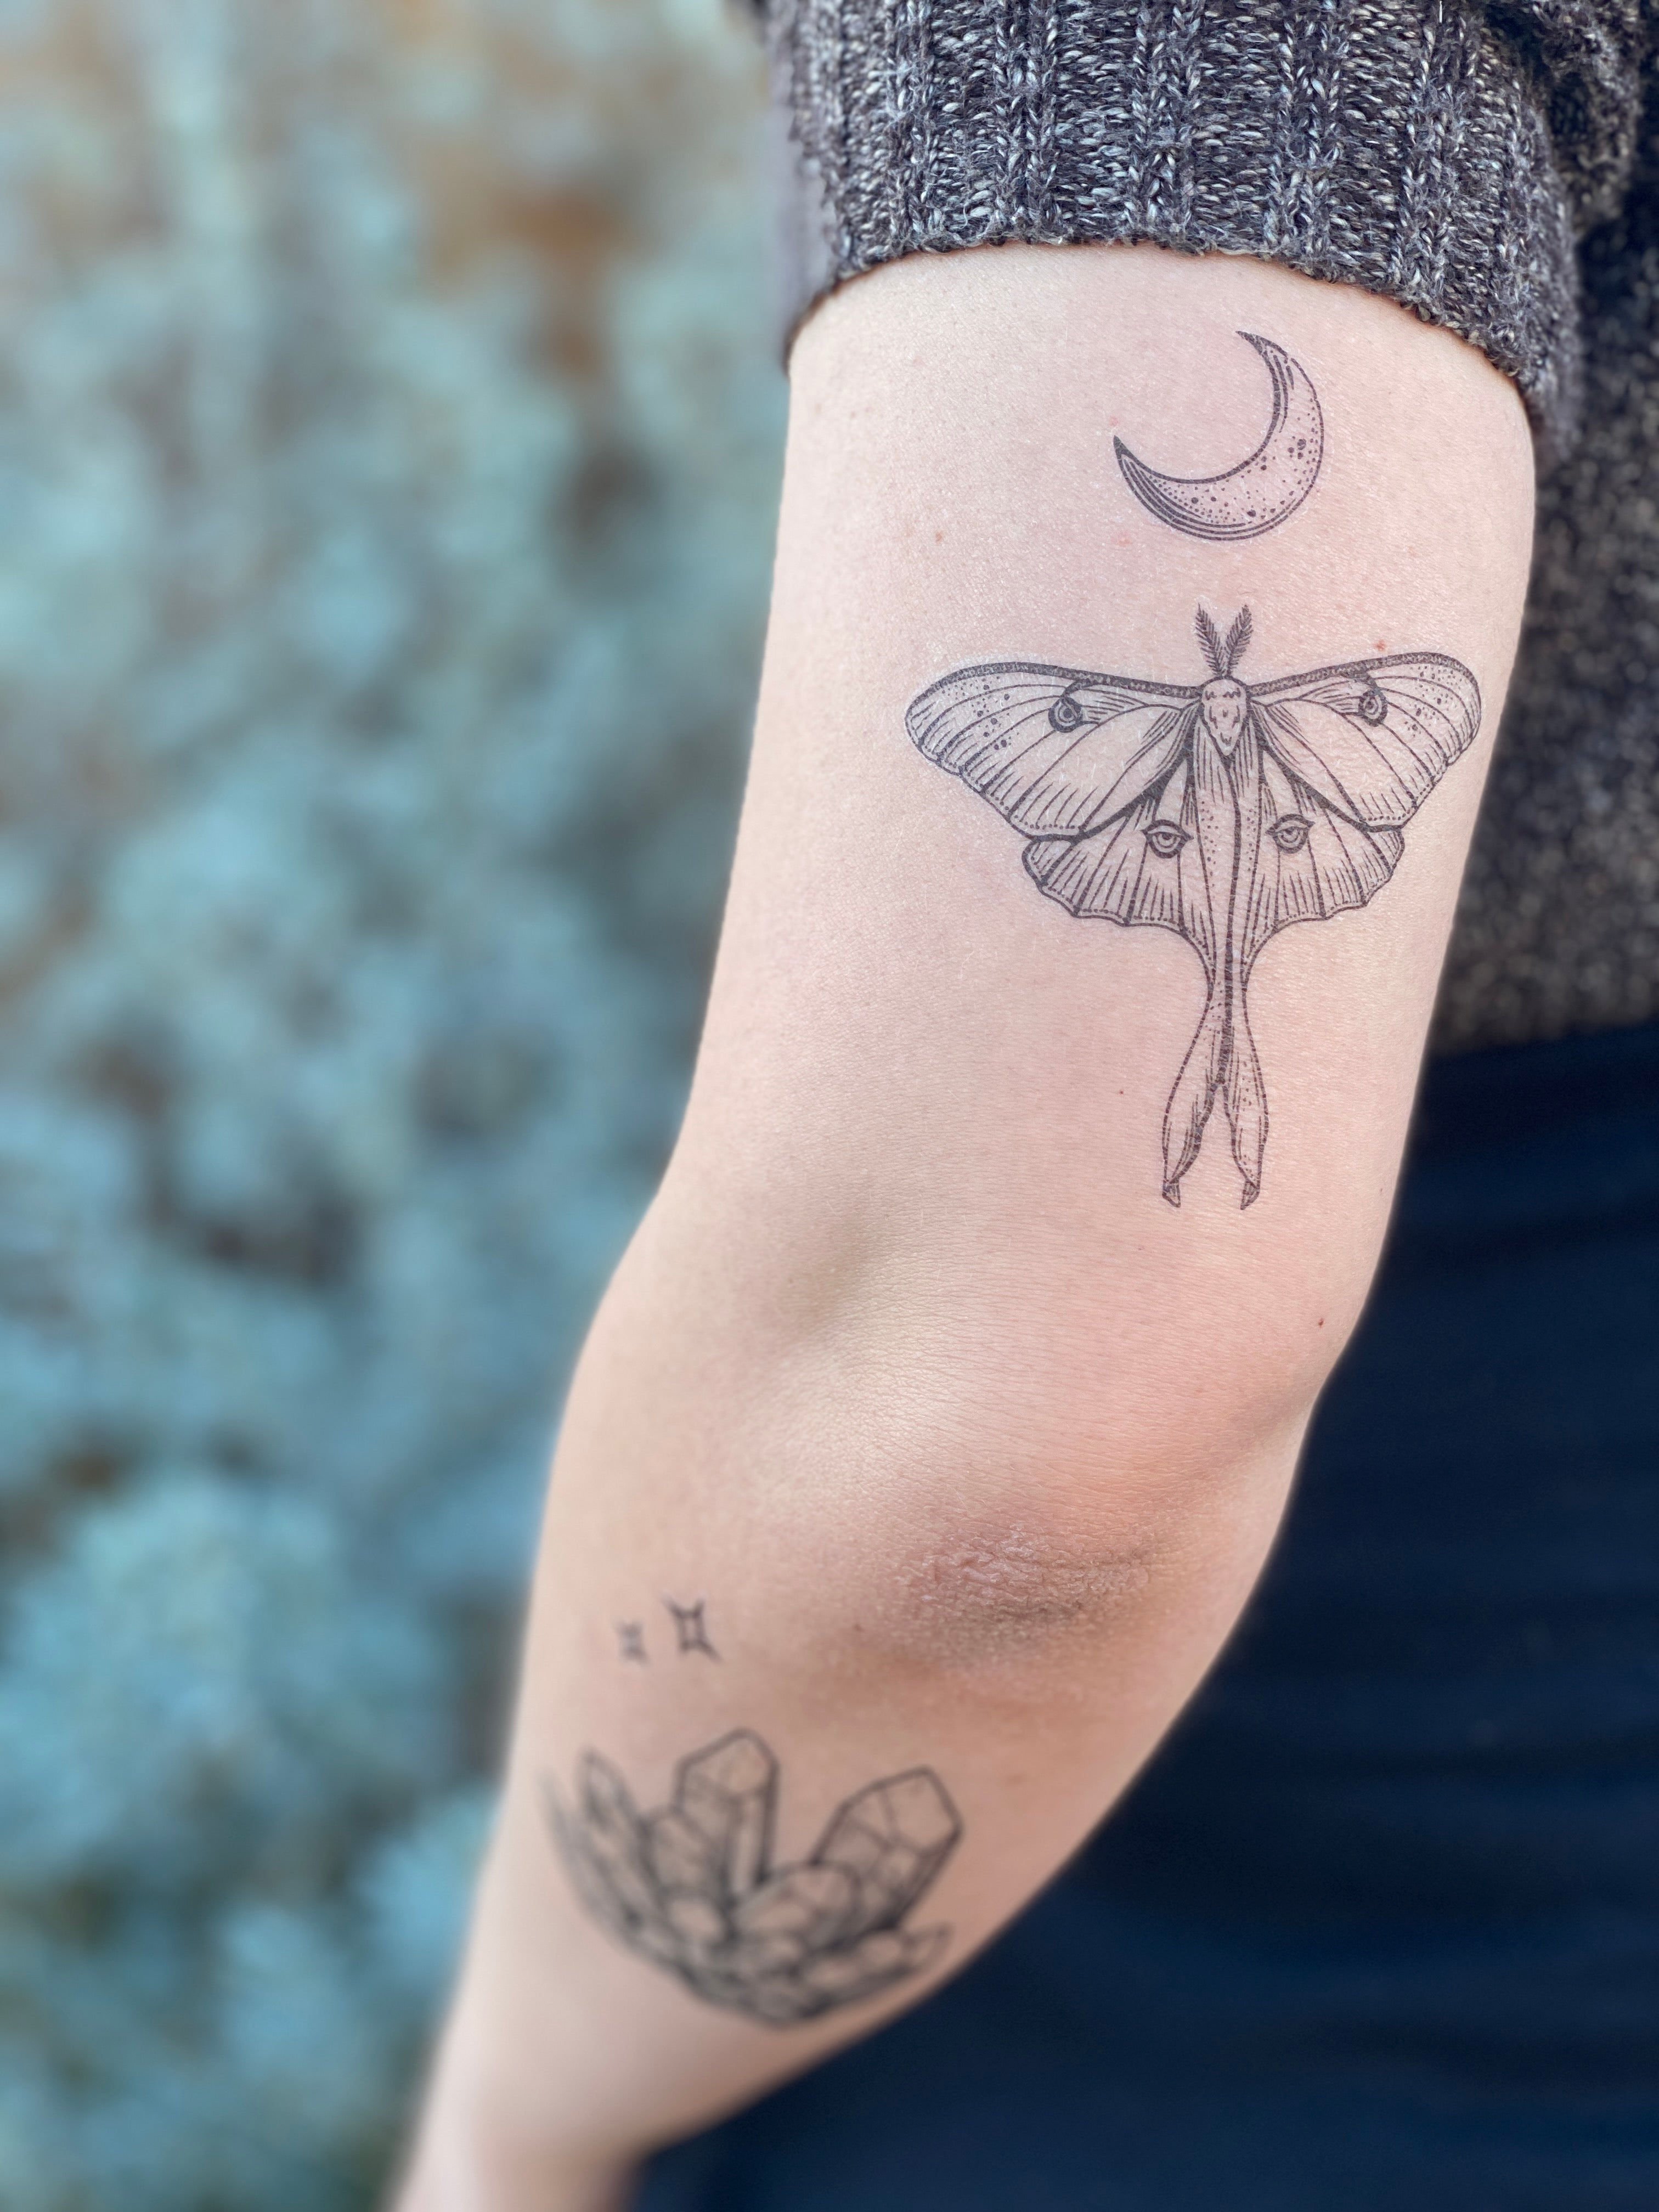 Fresh outline of my Luna moth  peonies going back in 2 weeks to finish  The beginning to a 12 floralyforesty sleeve  done by Marissa Falanga  at Darkside Tattoo East Haven